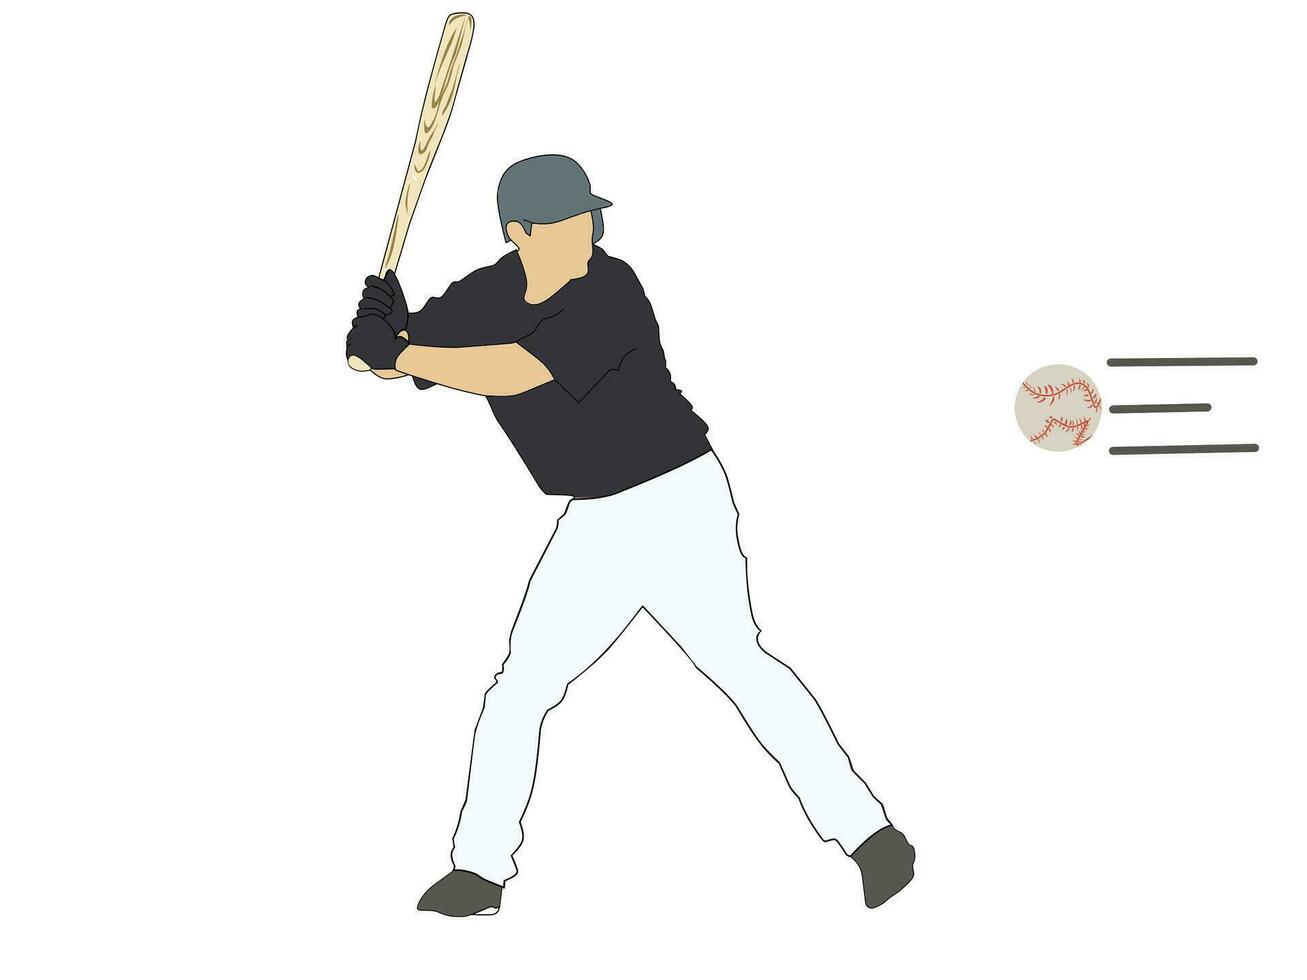 Vector illustration of a bat player trying to hit a ball rushing towards him. Sports -themed graphic display.